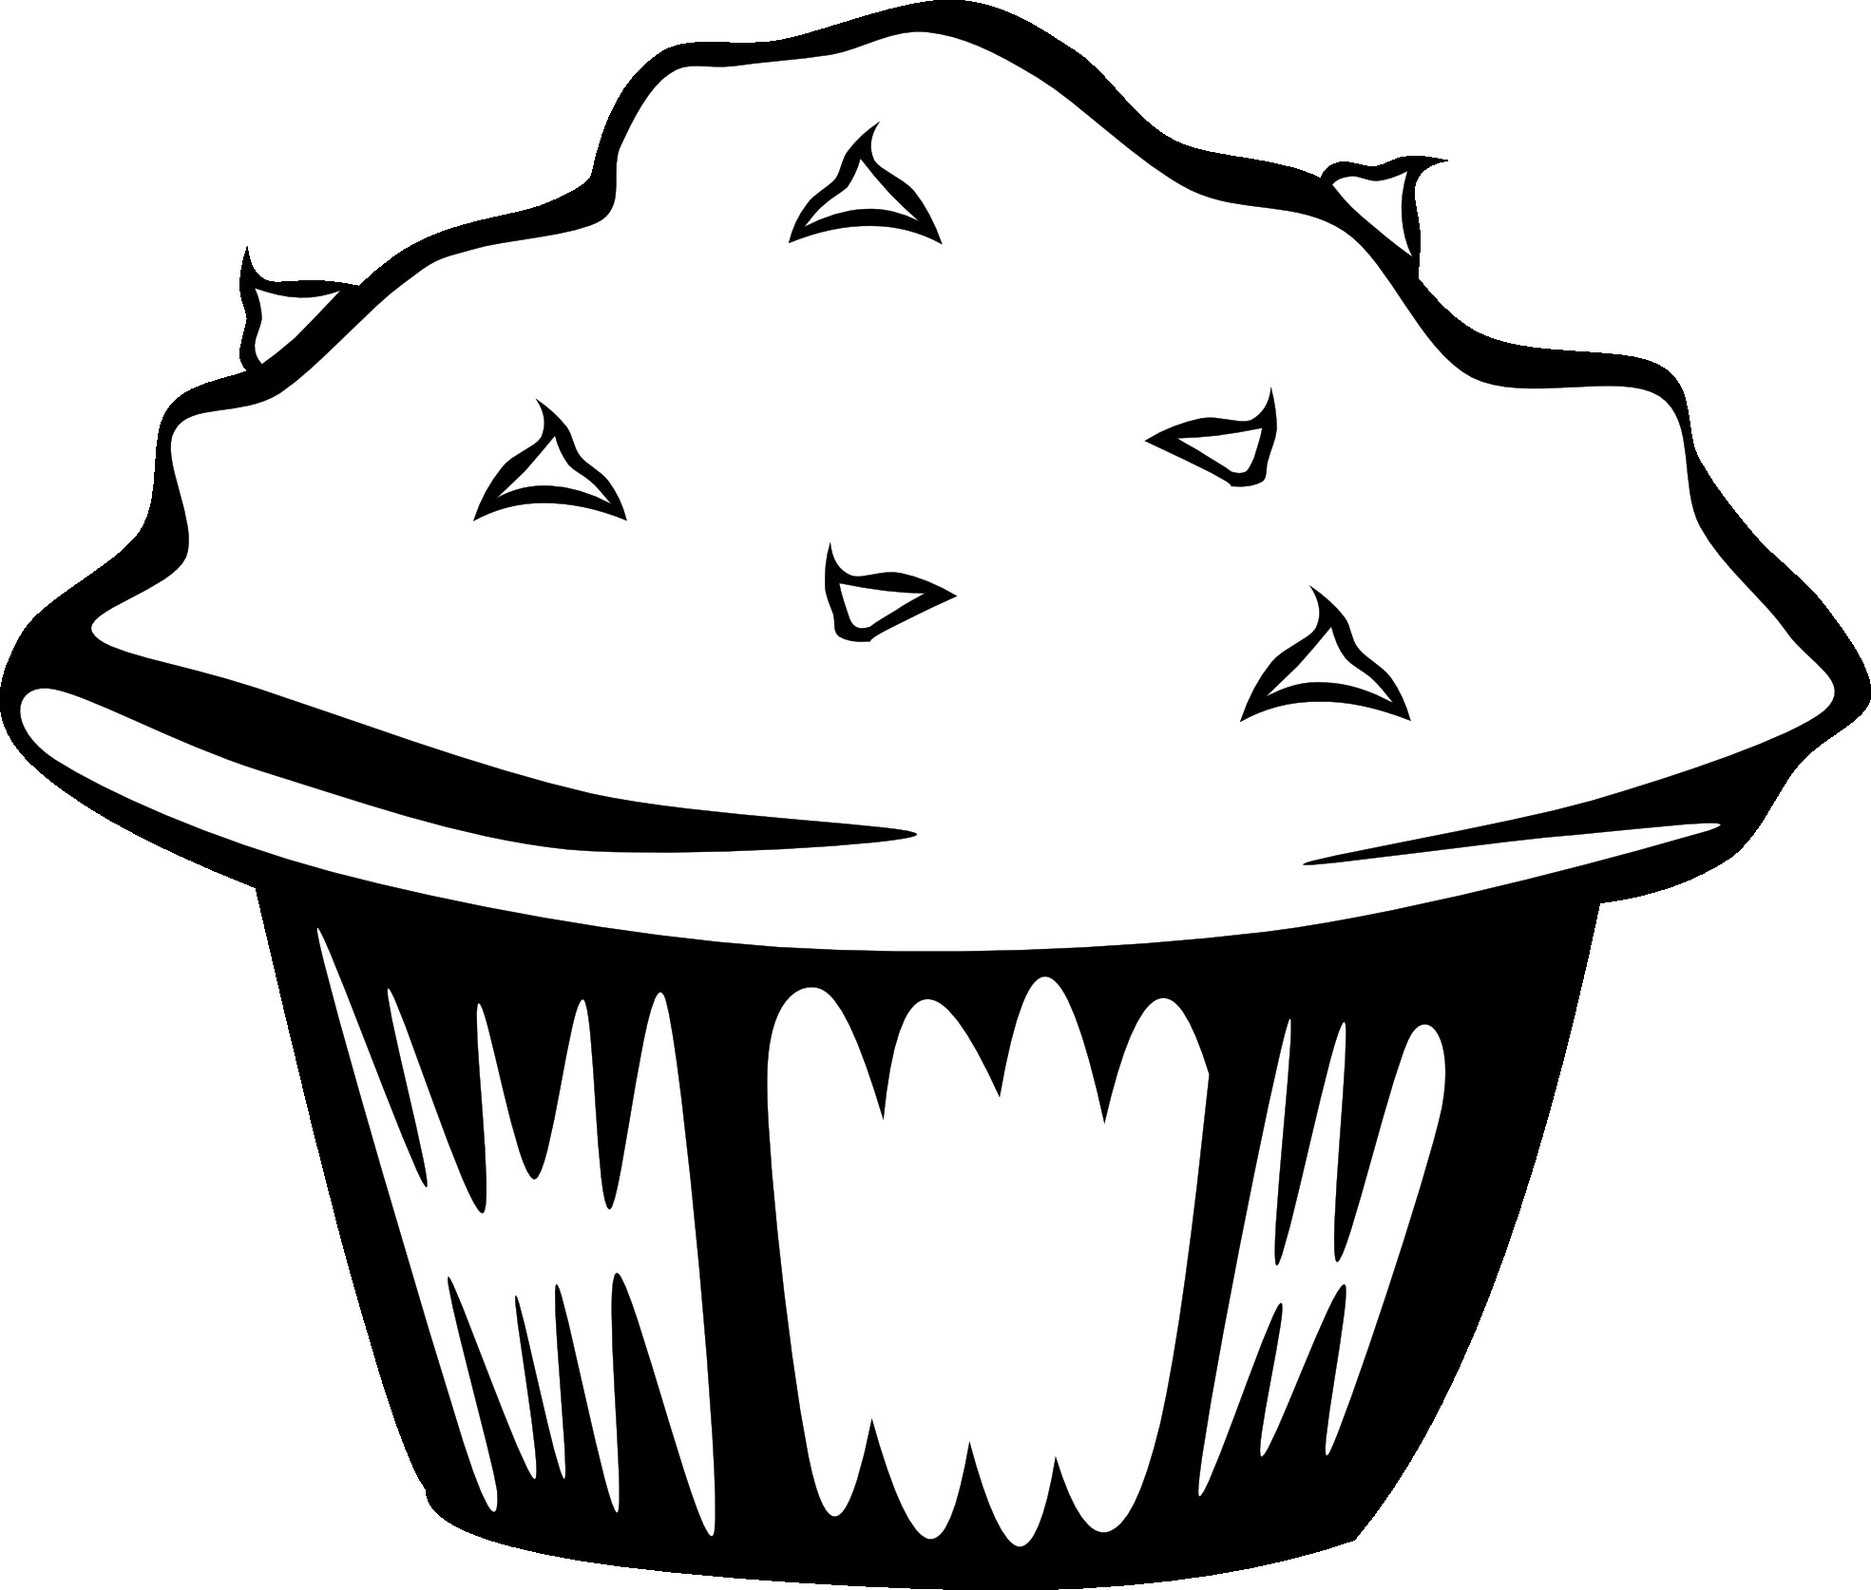 Free Food Clip Art Black And White, Download Free Food Clip Art Black ...